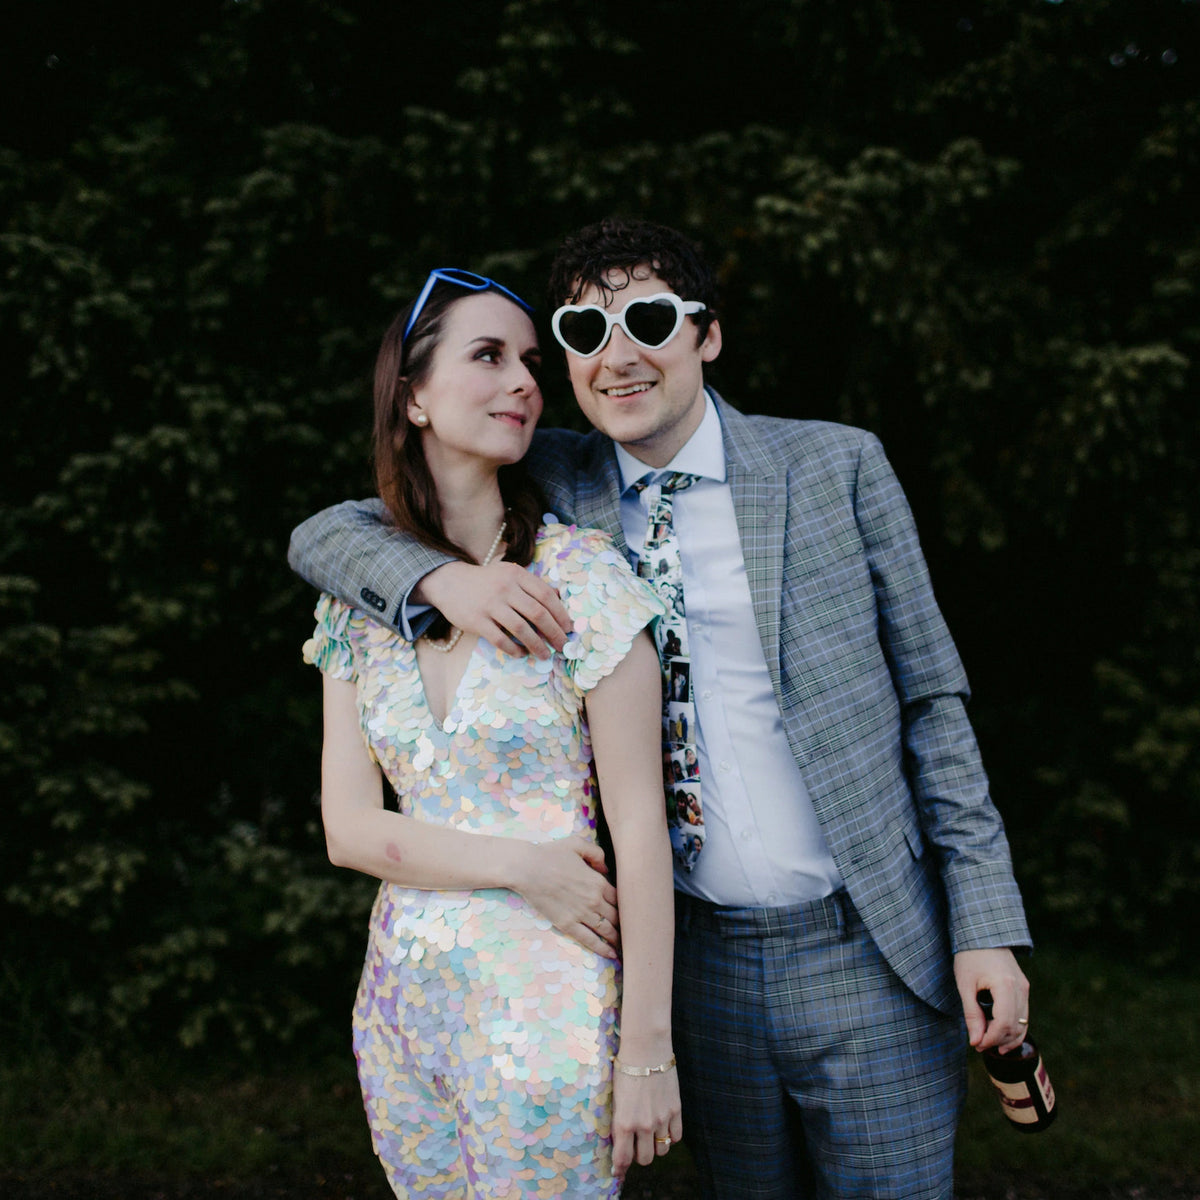 A bride wearing a festival style white sequin jumpsuit poses with her husband who is wearing a suit and sunglasses